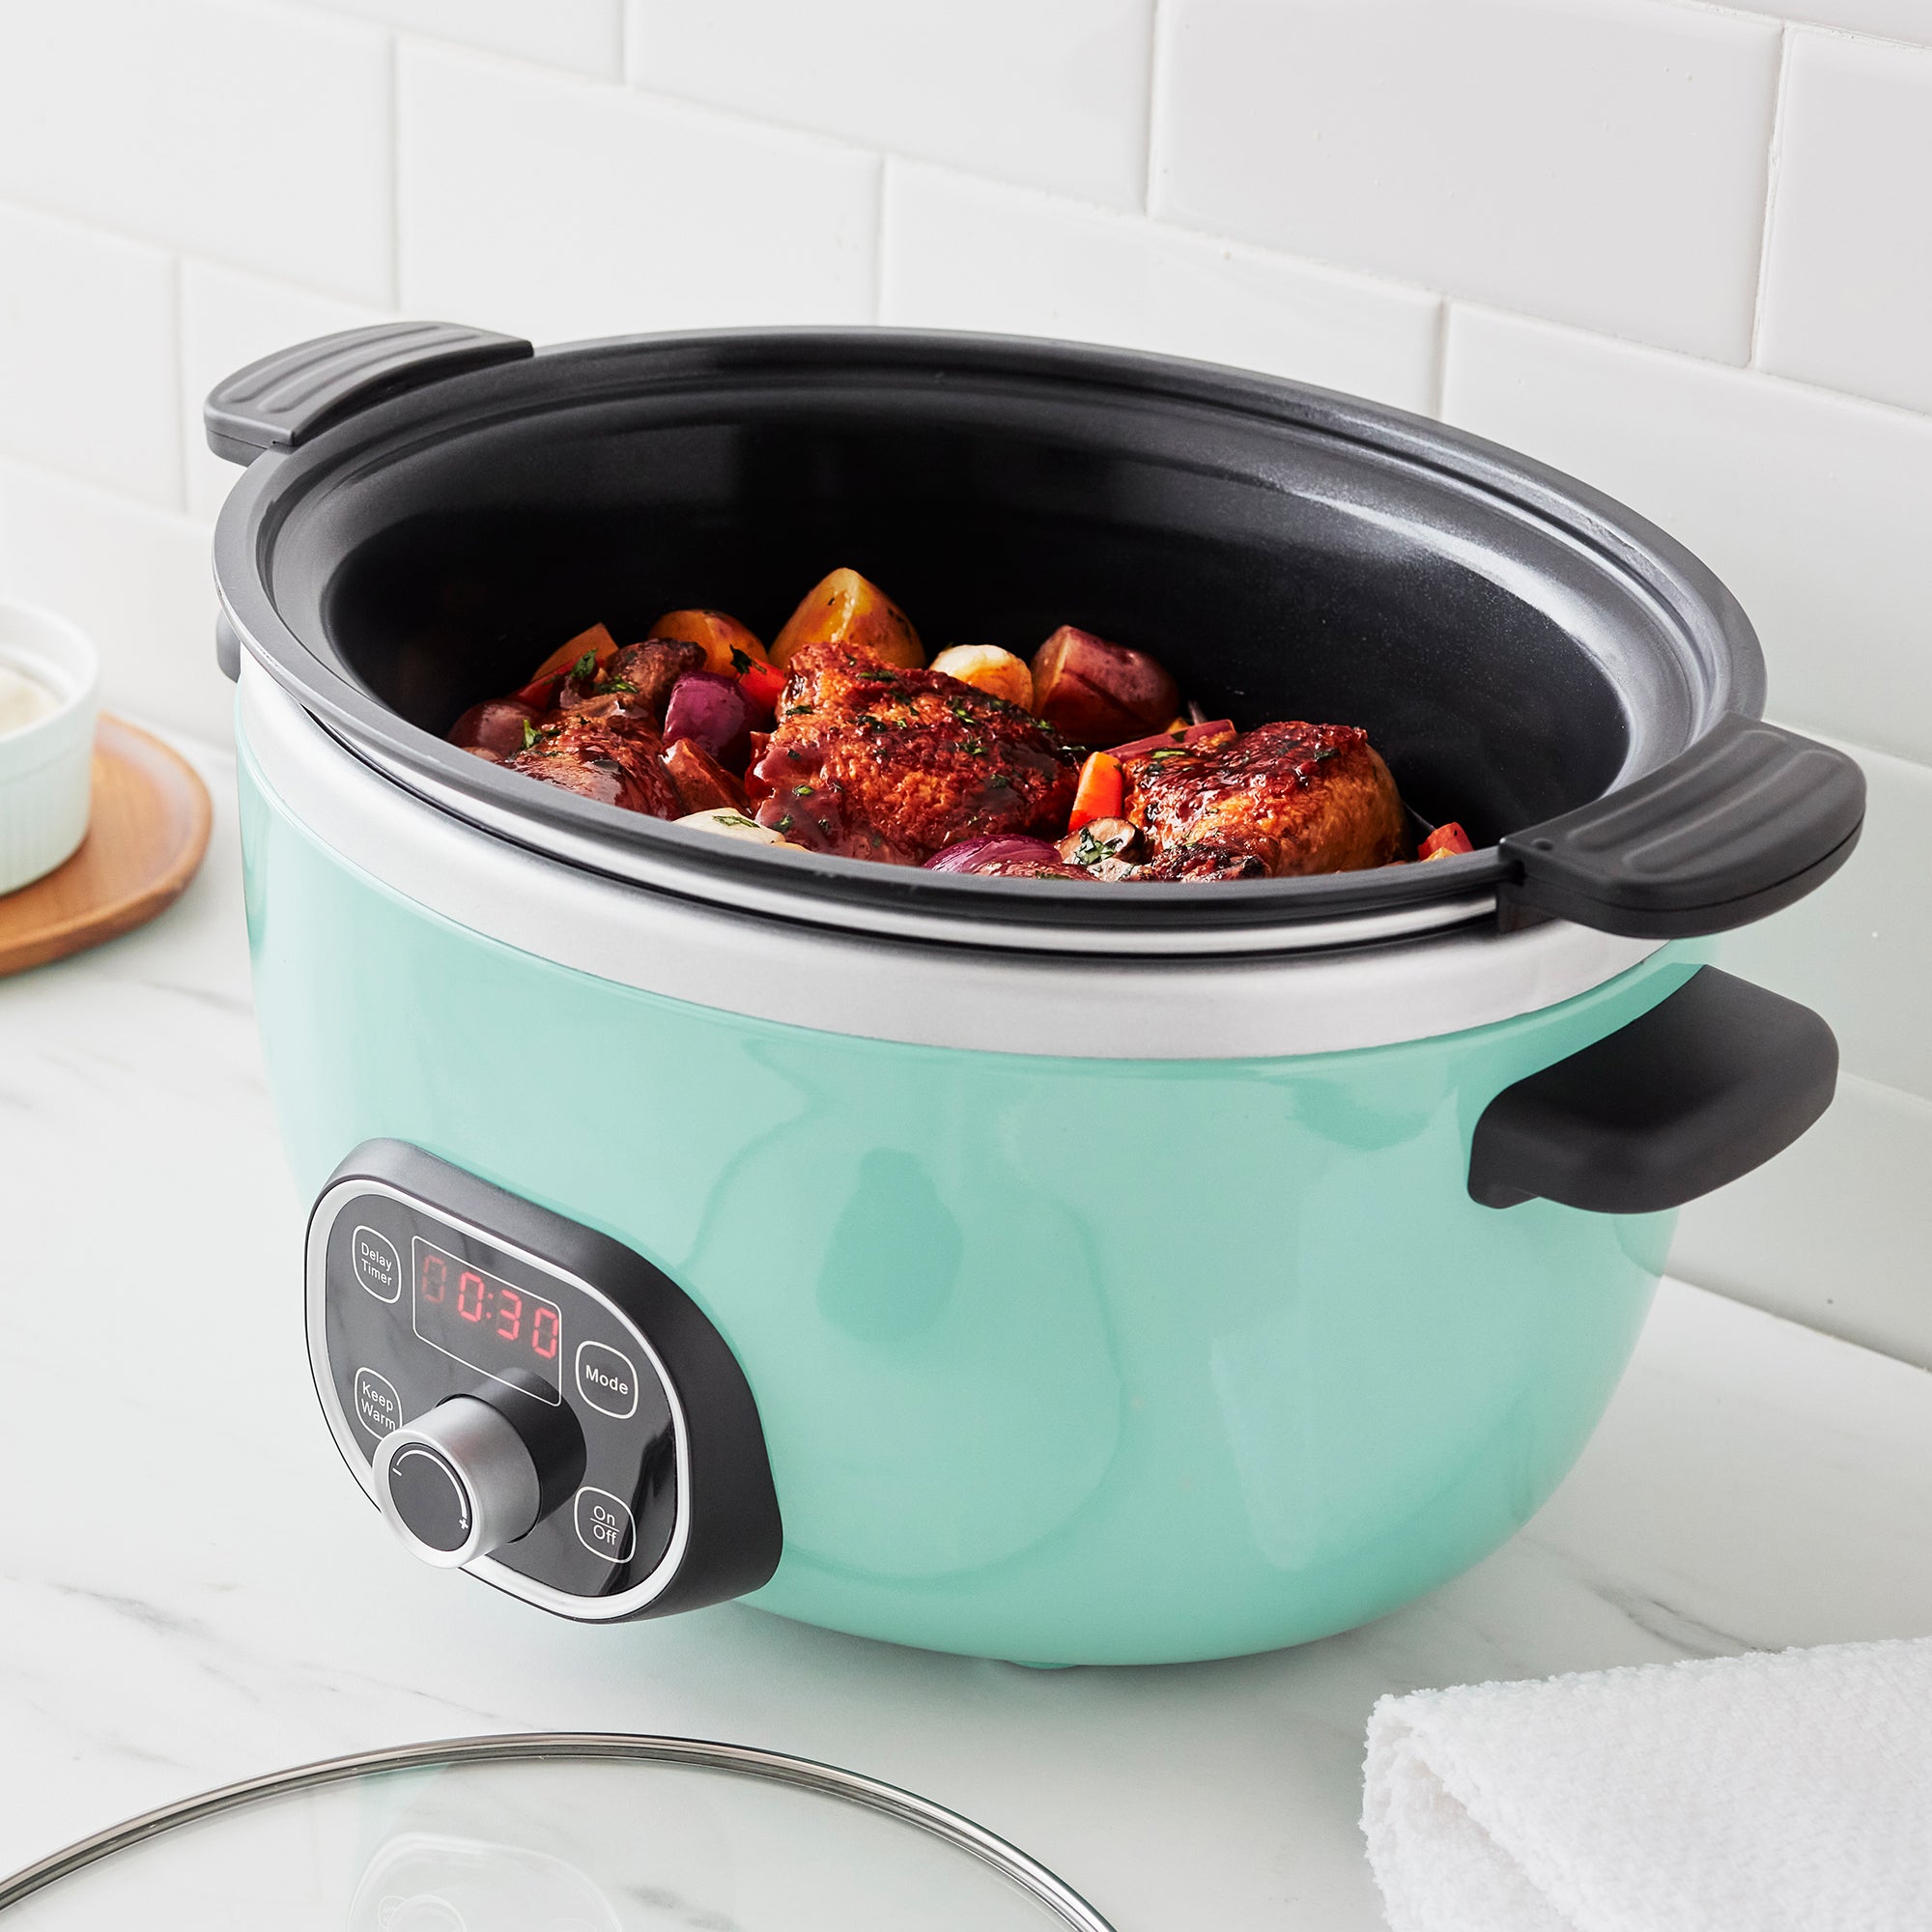 GreenLife Healthy Duo Slow Cooker, Turquoise